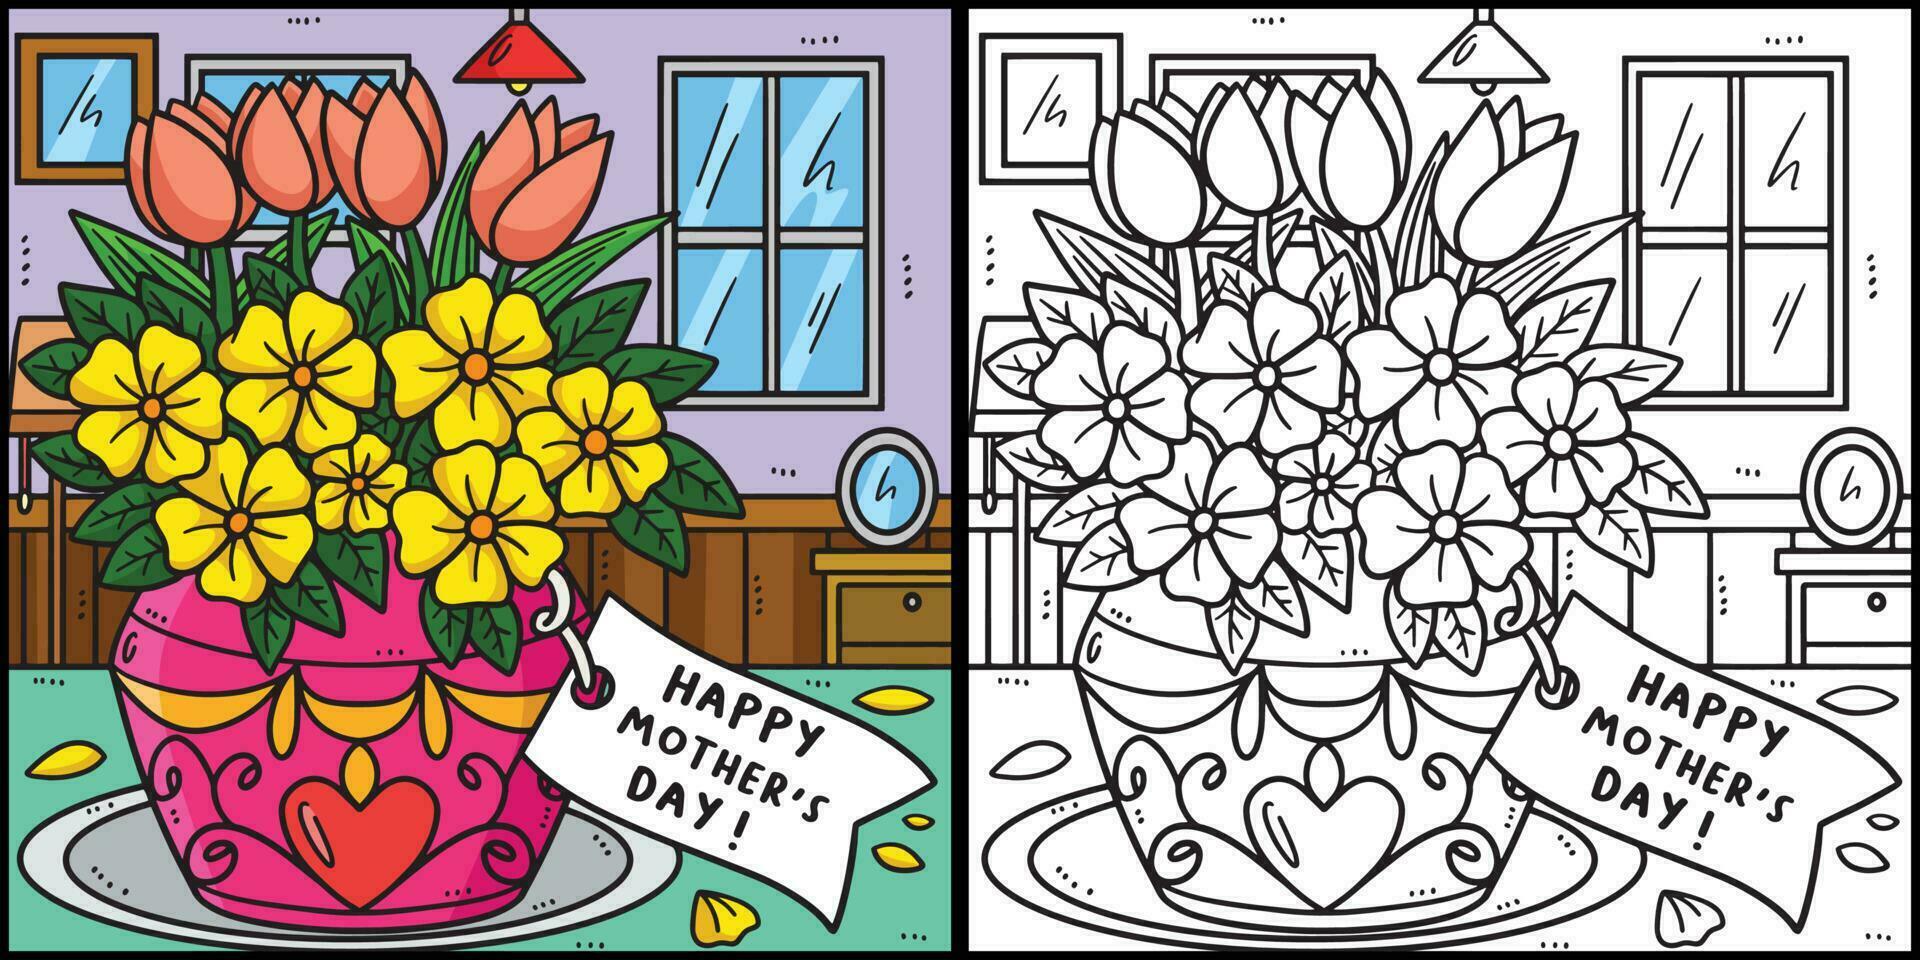 Mothers Day Flowers and Greeting Card Illustration vector